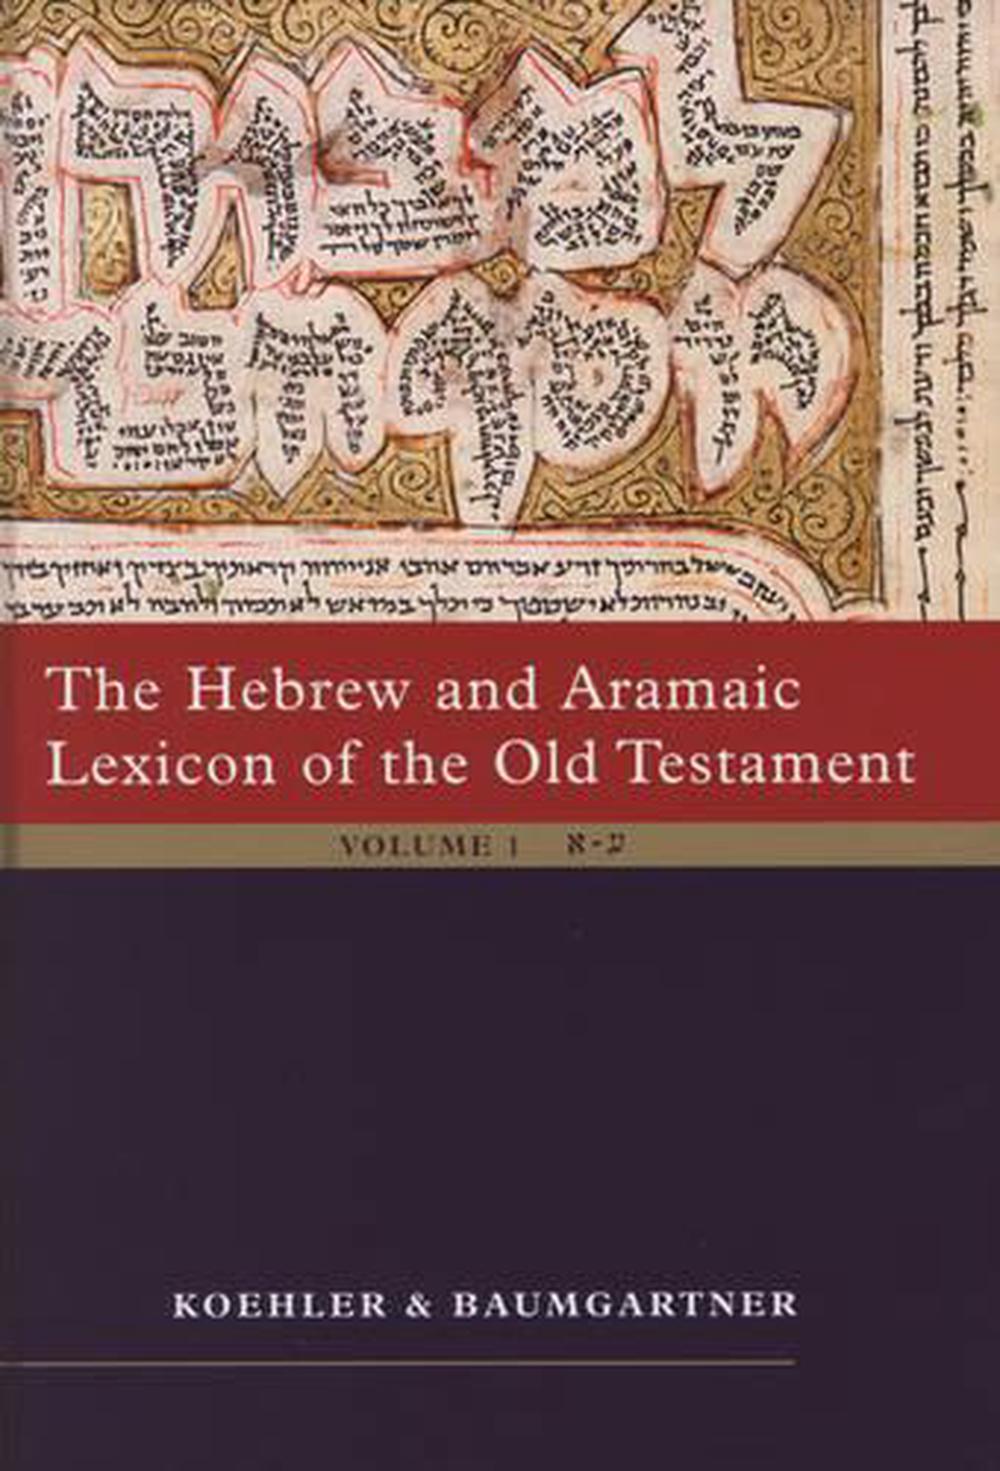 The Hebrew and Aramaic Lexicon of the Old Testament (2 Vol. Set